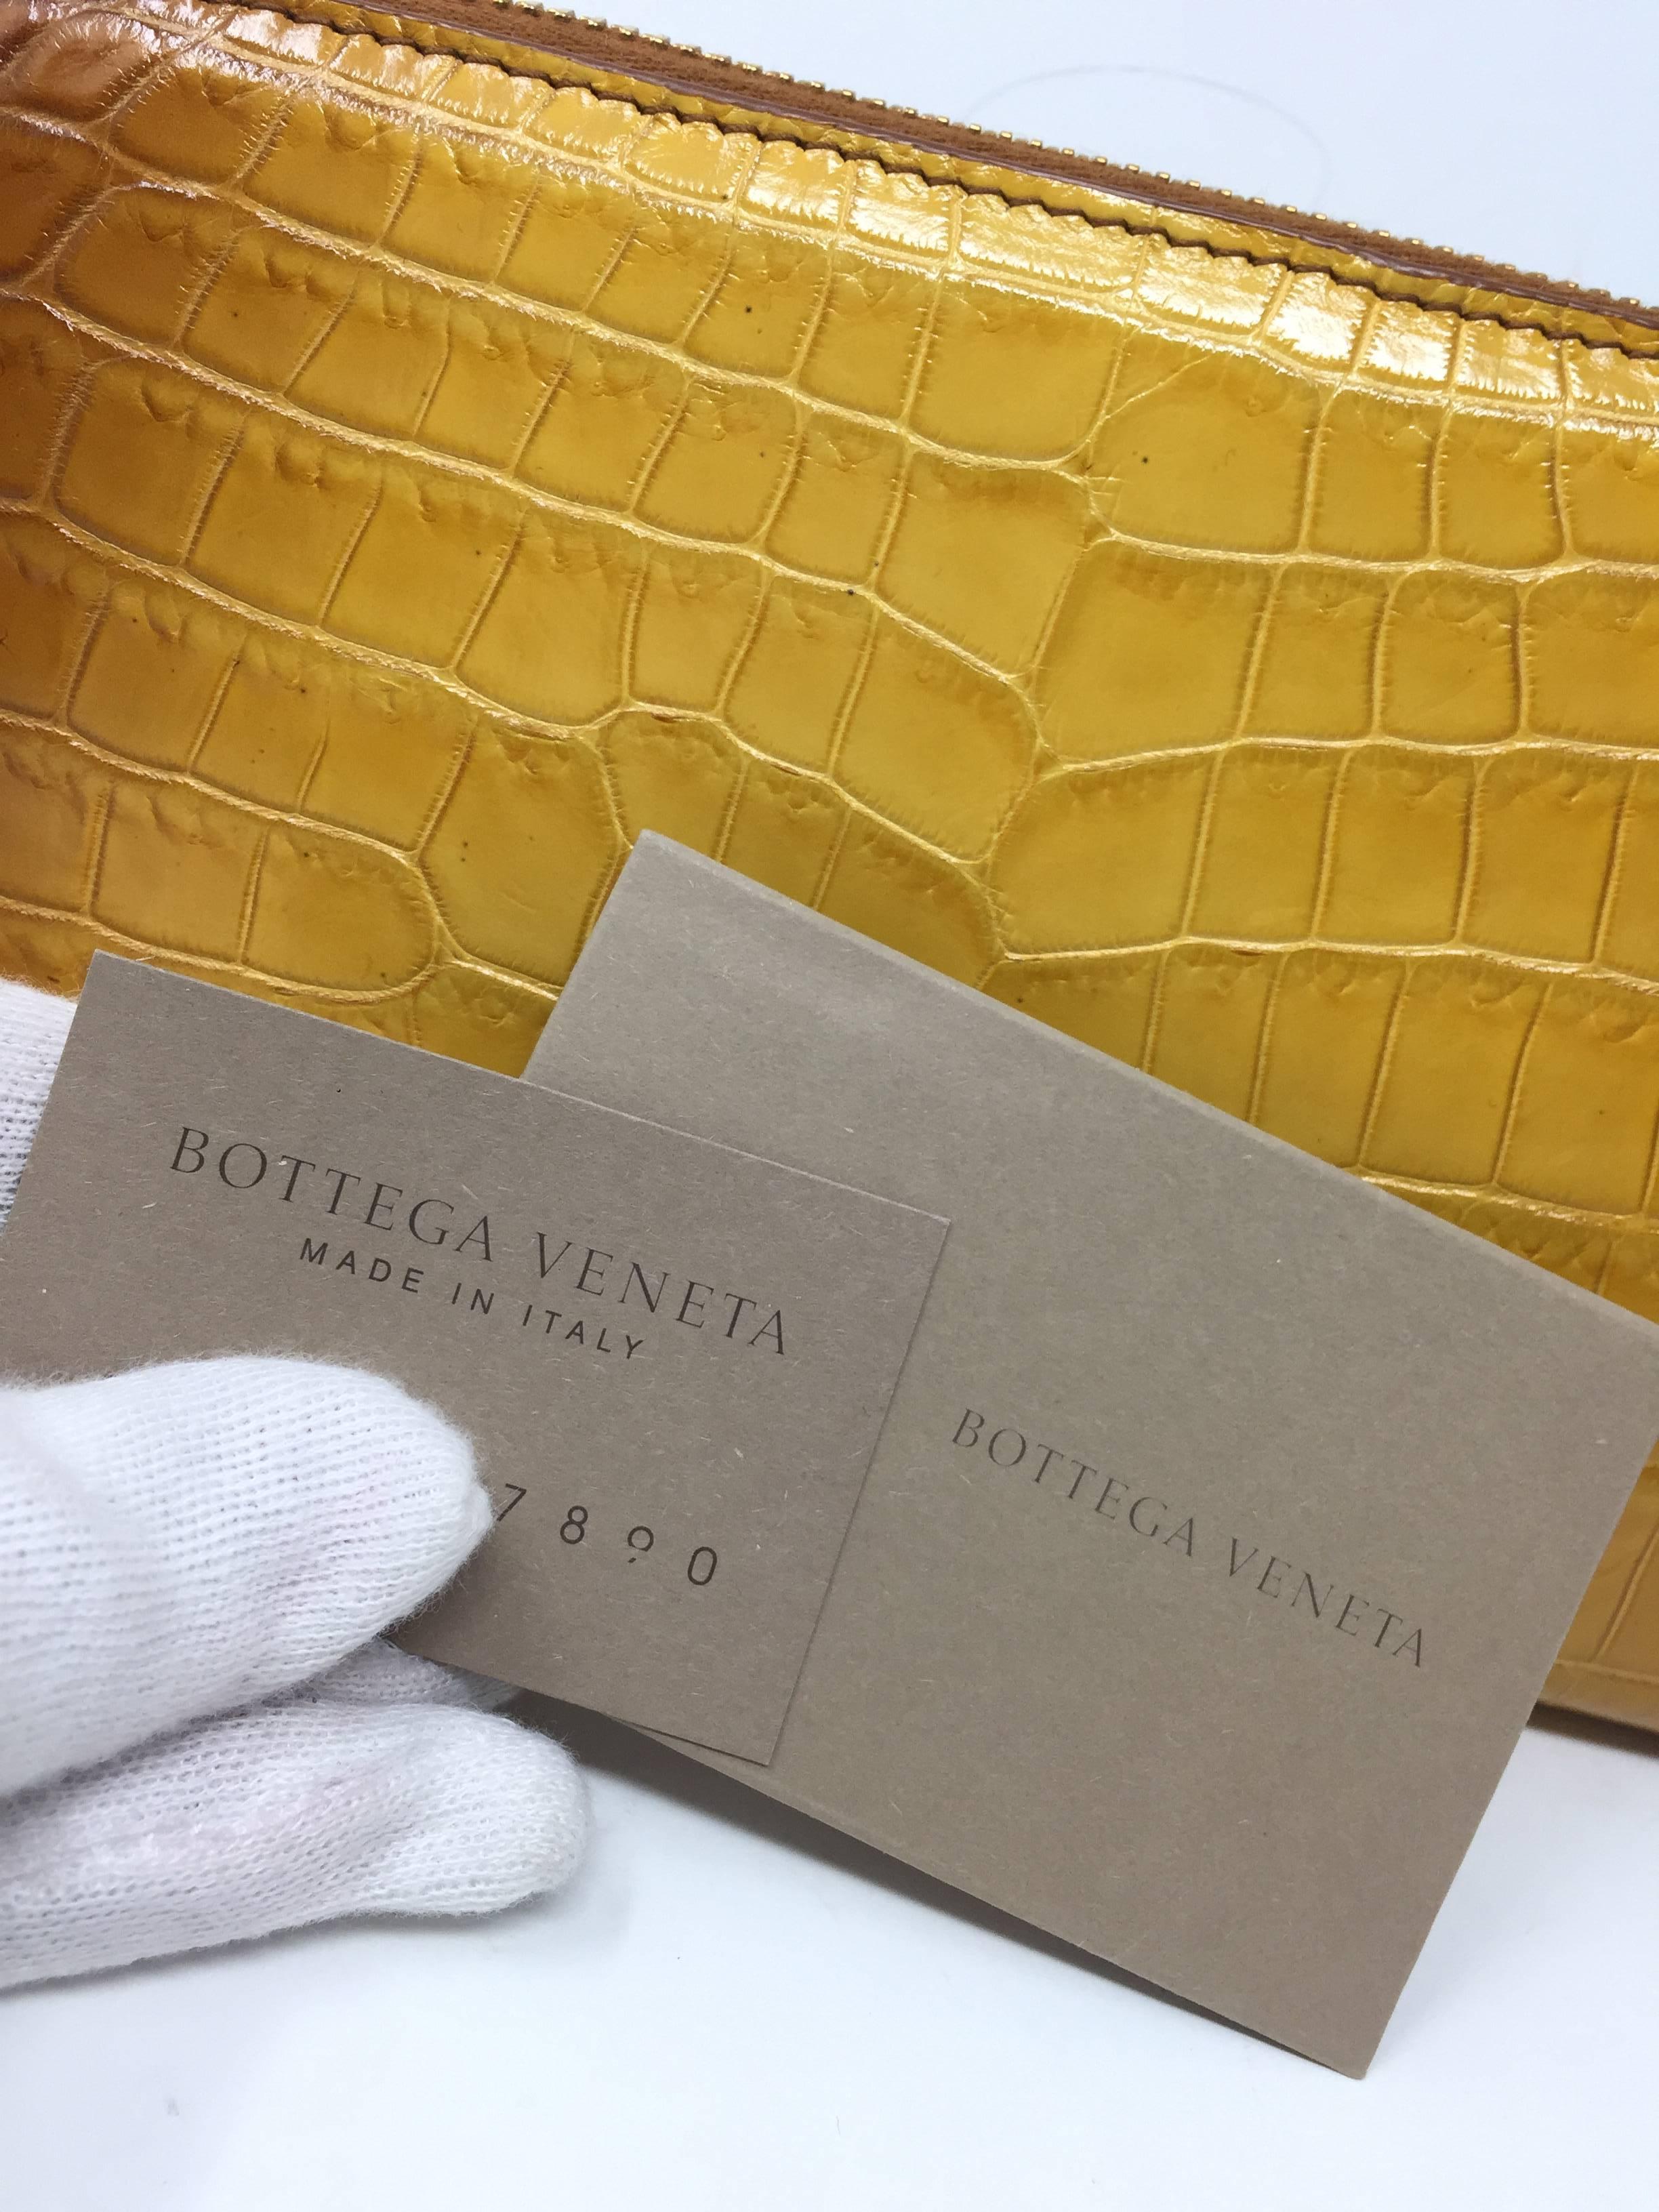 The Cocco Glace Wallet by Bottega Veneta is a beautiful accessory made of shiny crocodile leather, has an elegant dègradé color that fades from caramel brown to yellow.

The exotic combination of smoky crocodile and bright Luxanil leather adds a